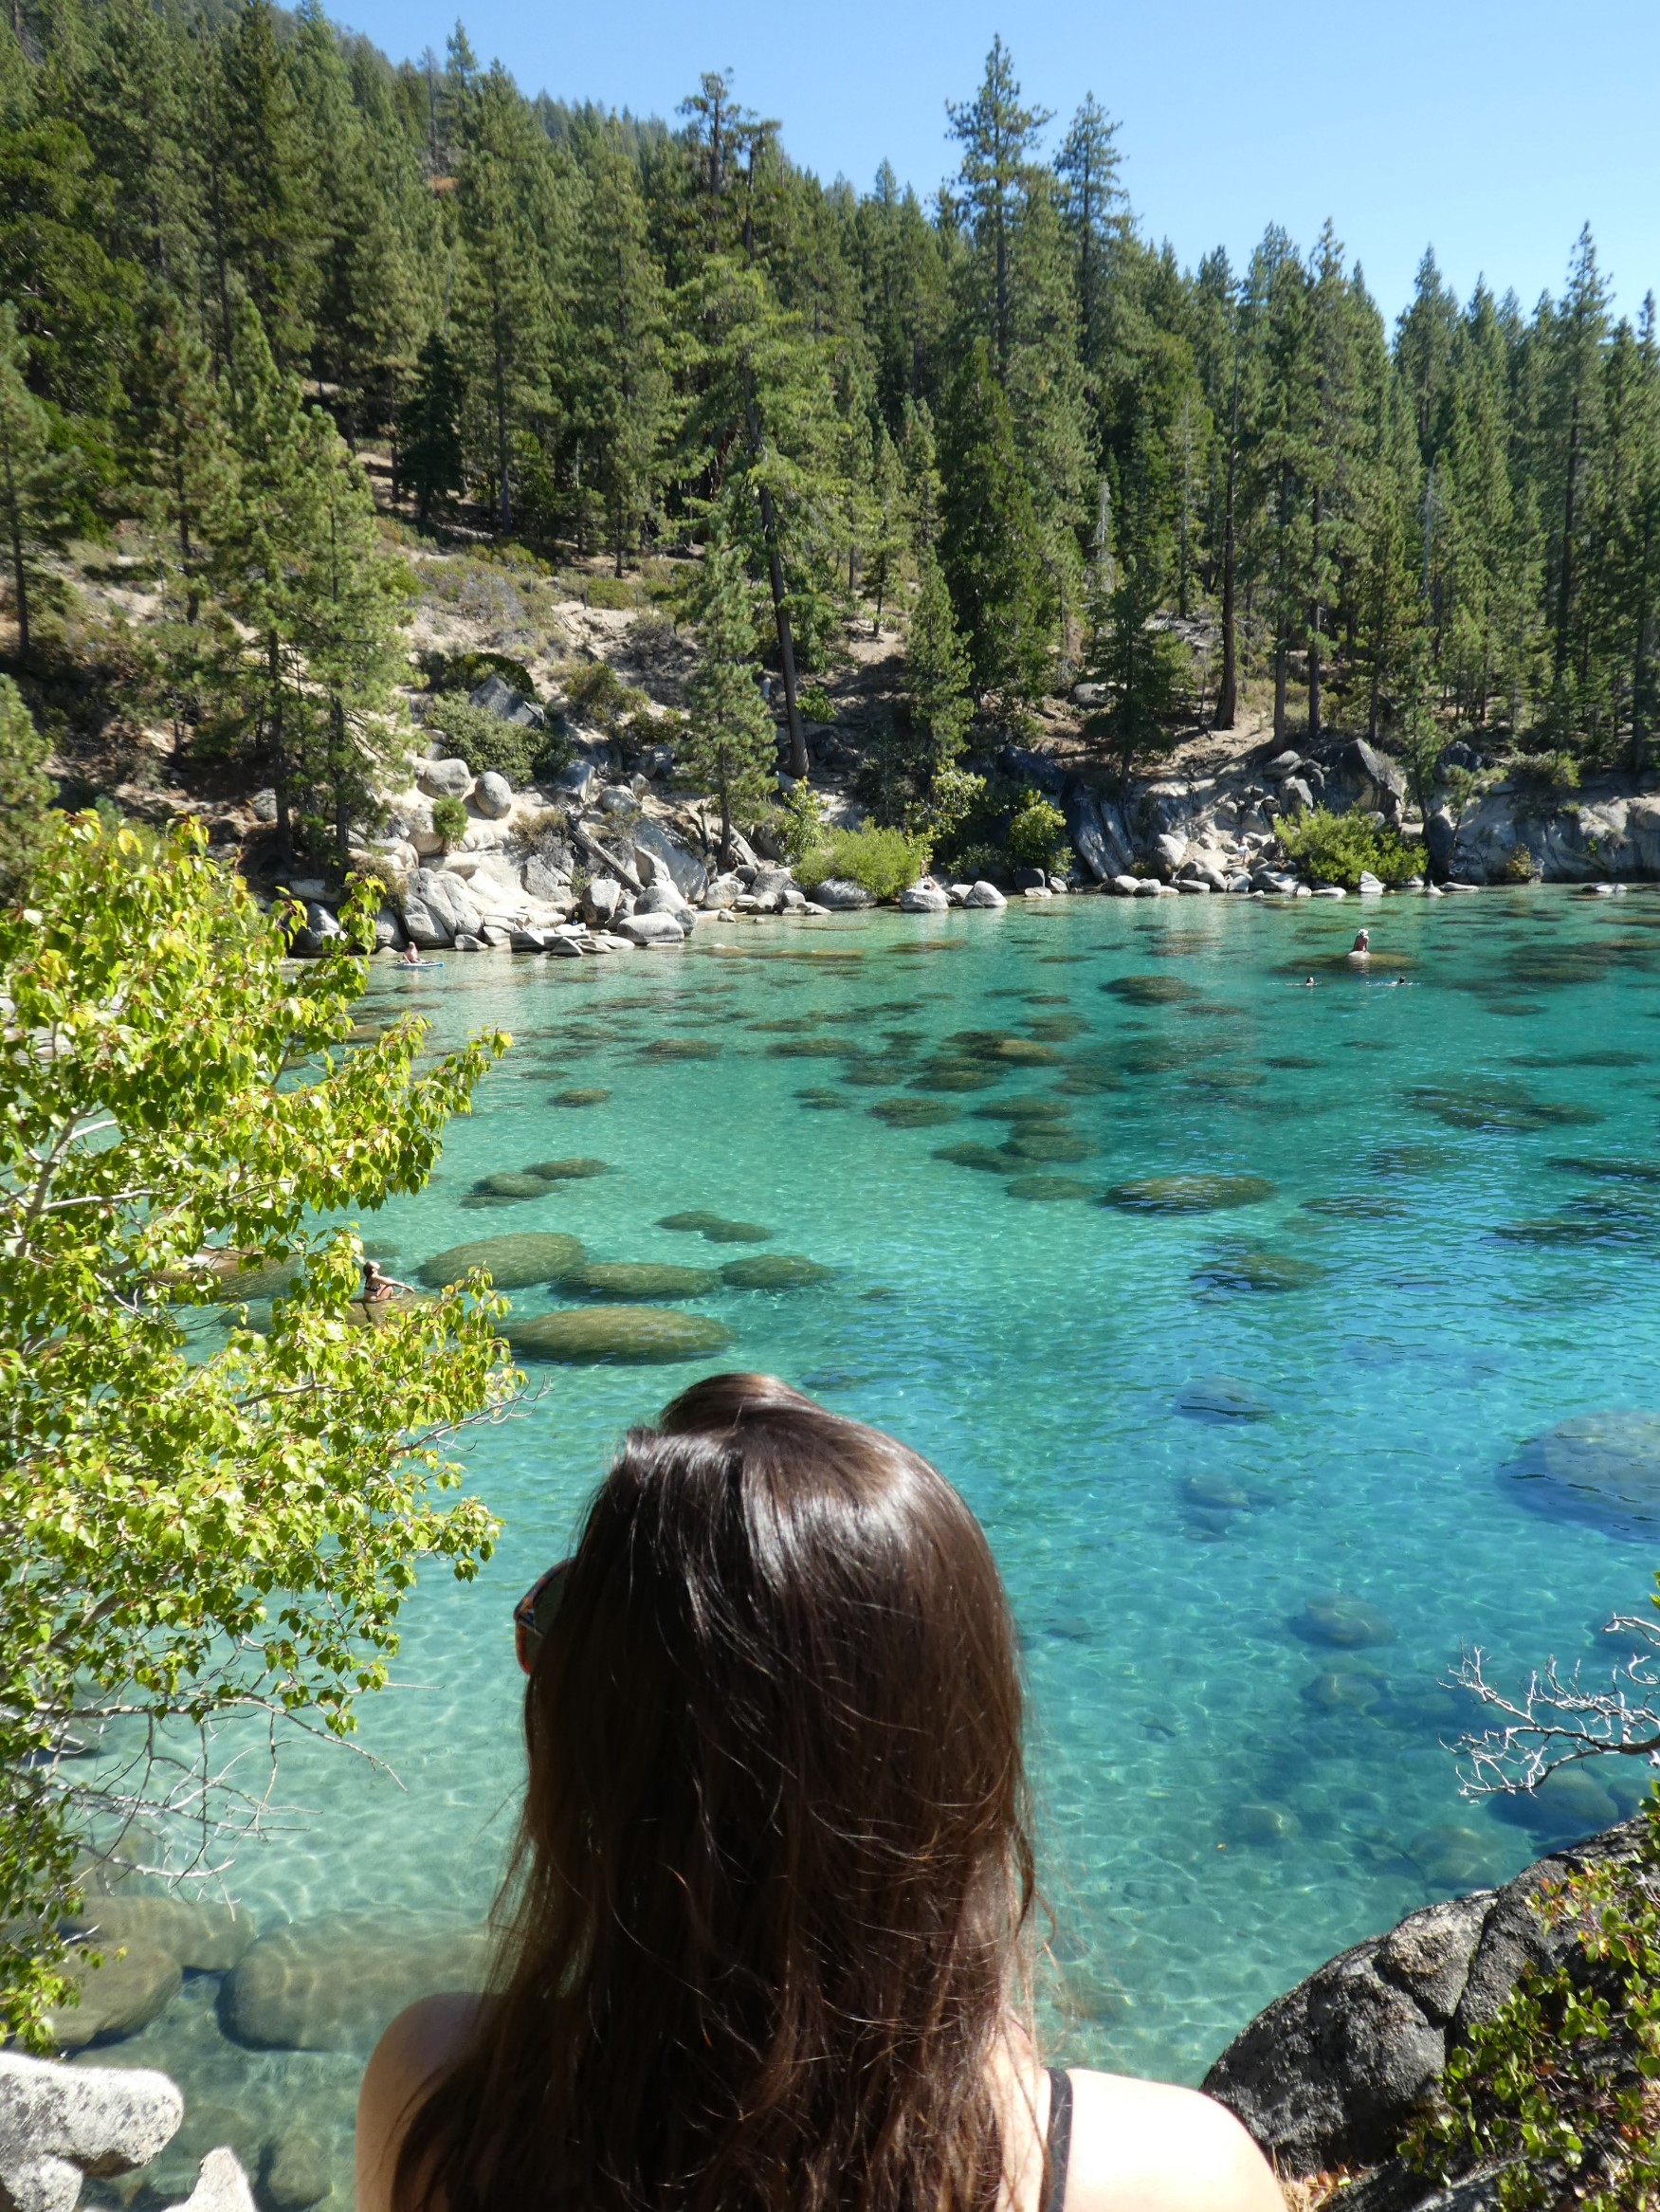 Crystal clear waters of the Secret Cove at Lake Tahoe - Copyright hesaidorshesaid